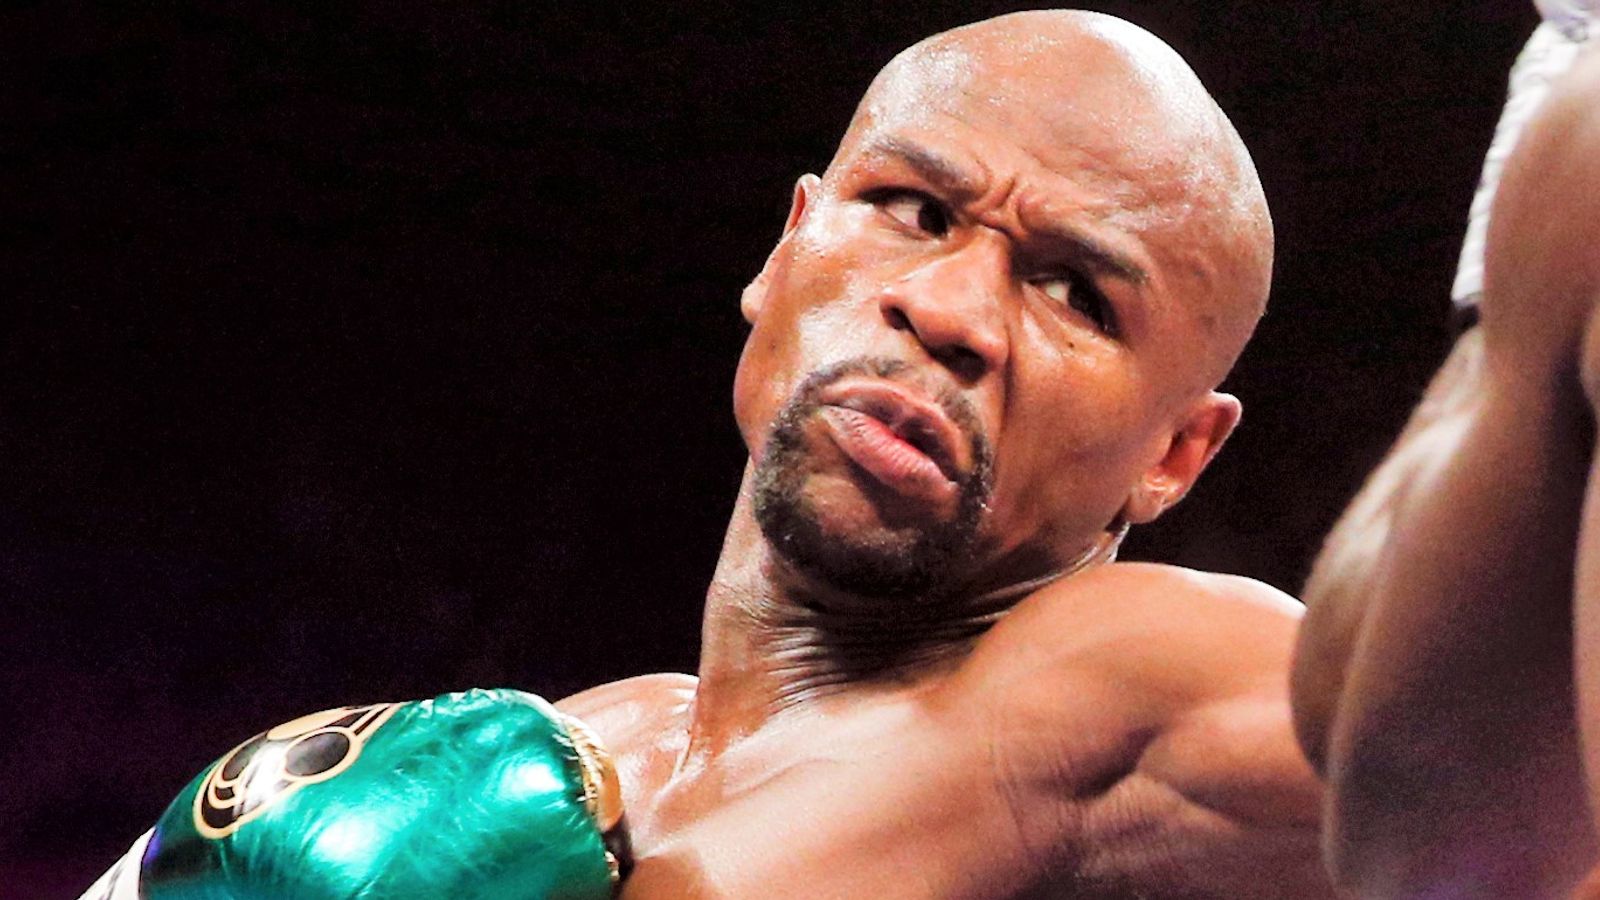 Mayweather, 44, teases fight against YouTuber thumbnail